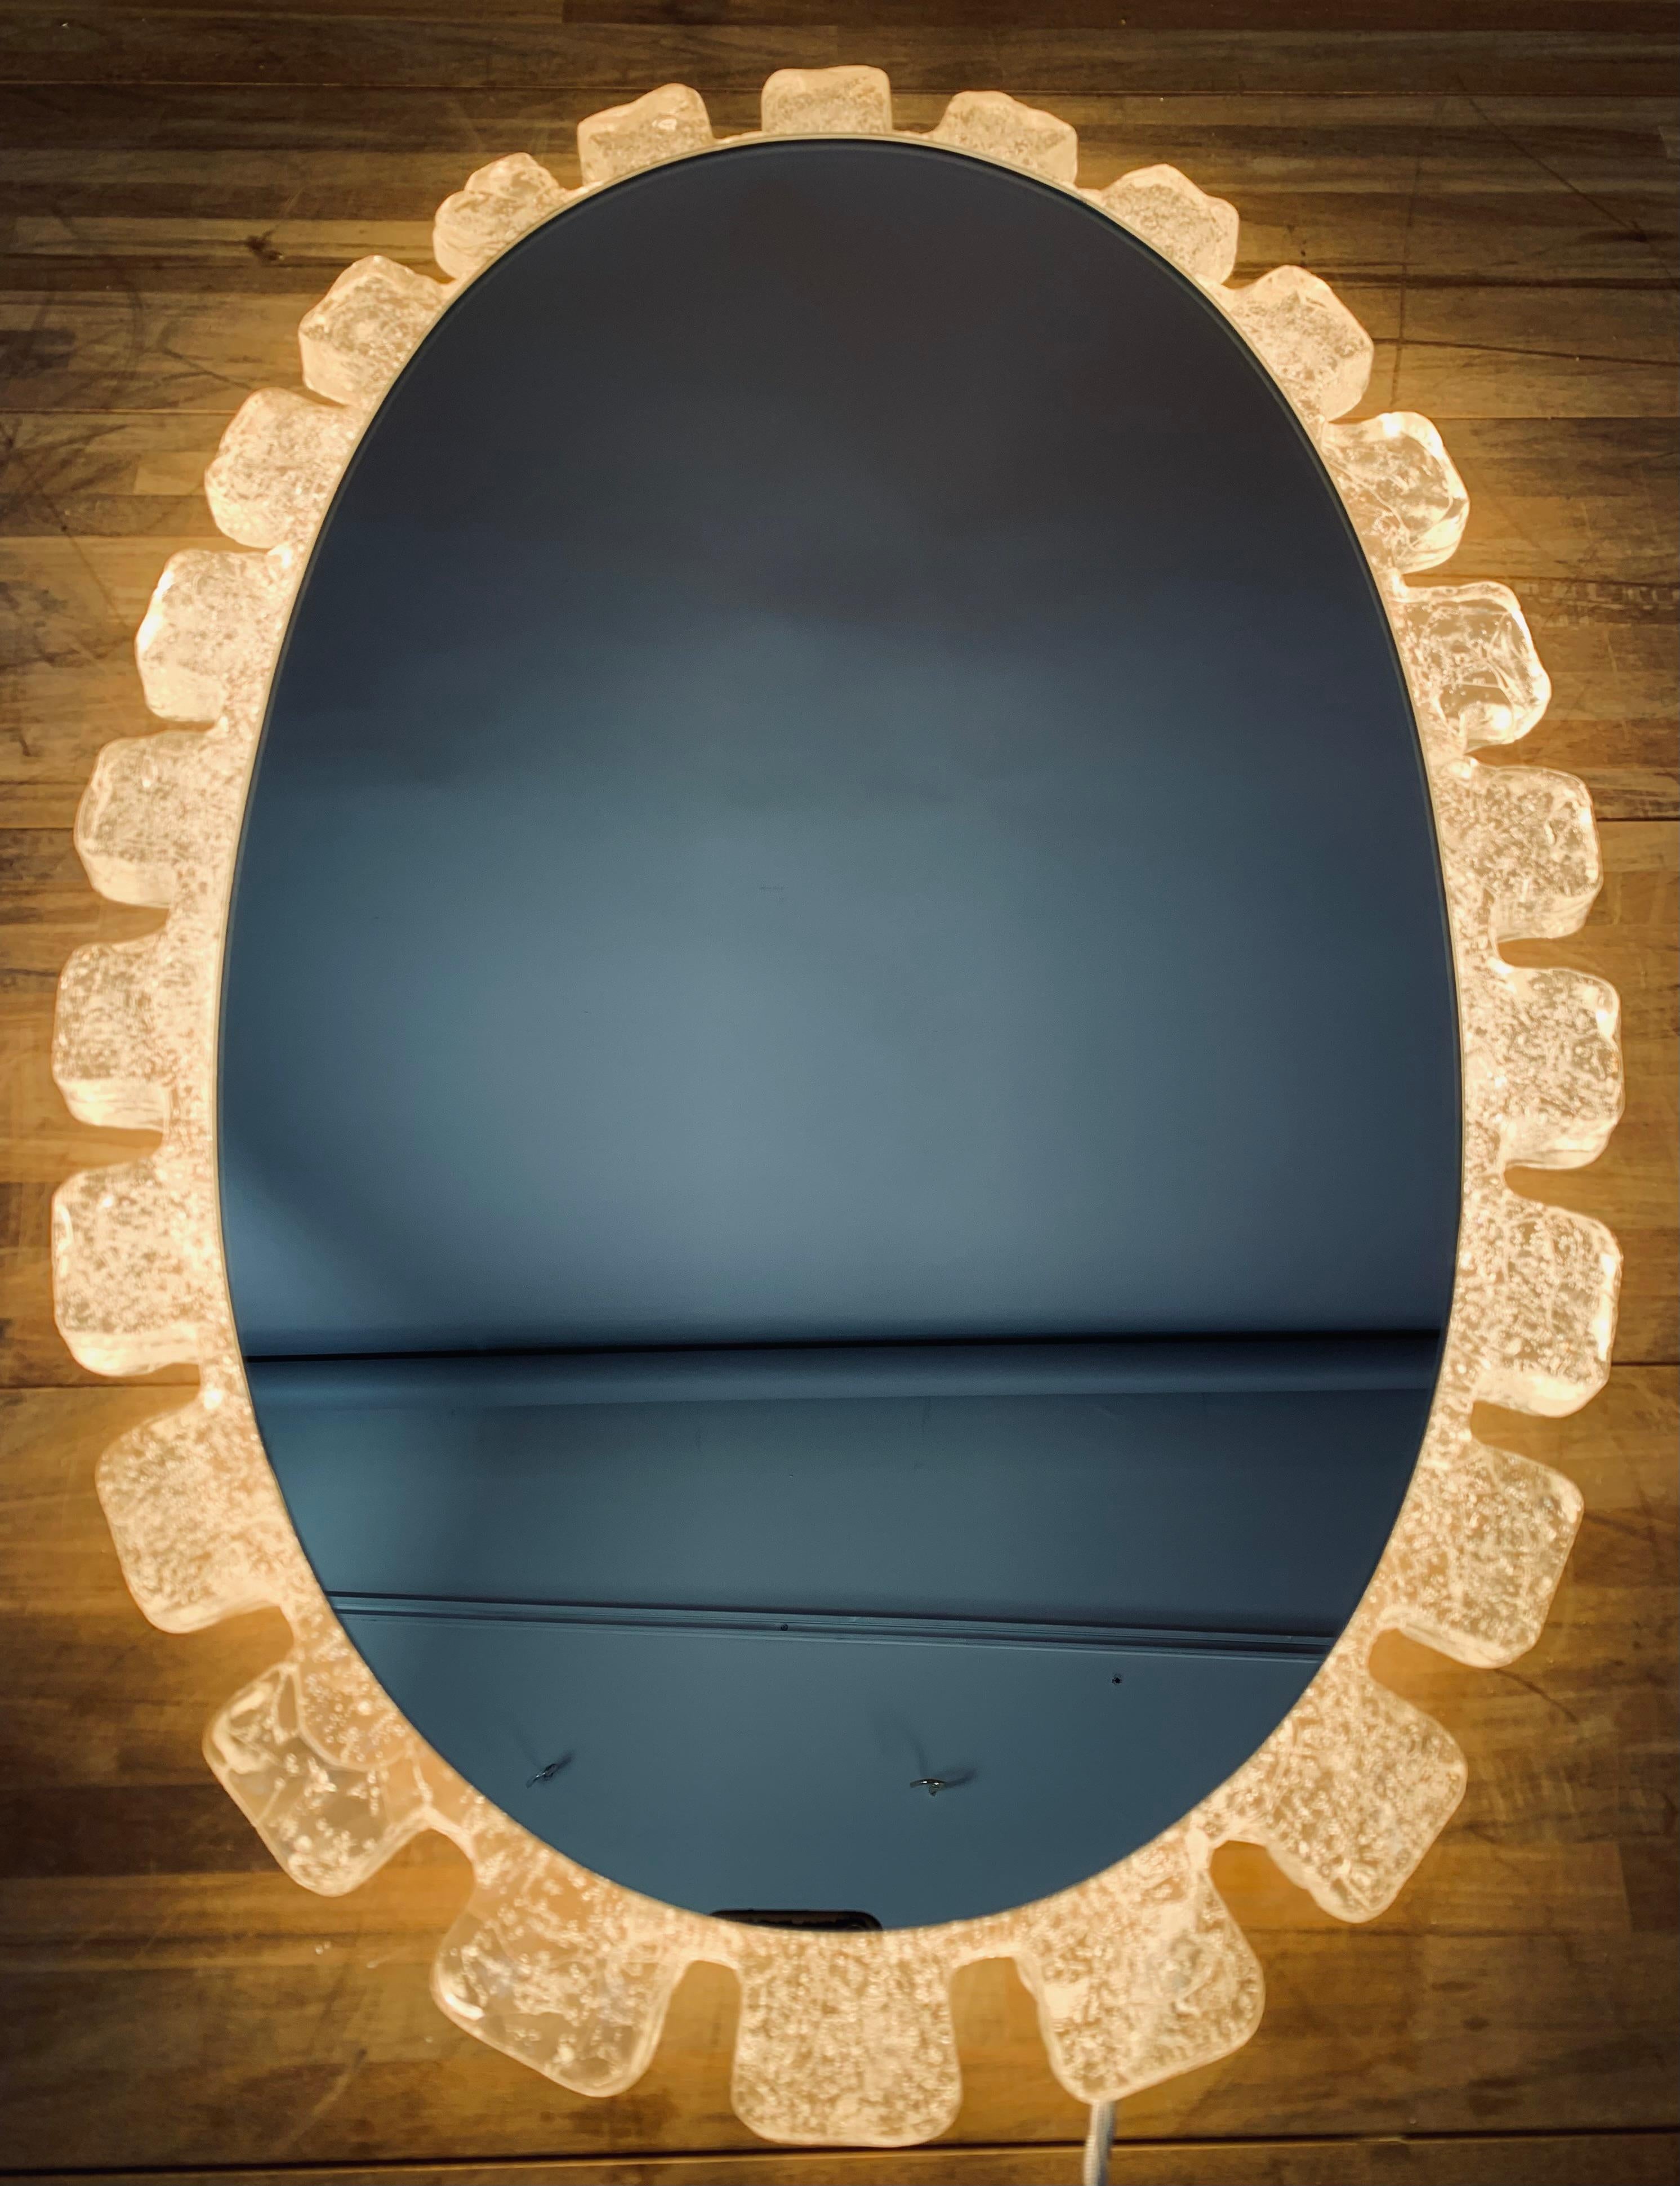 1970s German Hillebrand oval wall mirror with a frosted translucent acrylic frame. The mirror is supported by a white metal frame which the mirror hooks onto and also holds the four lightbulbs. The lucite frame glows evenly when lit and sheds a